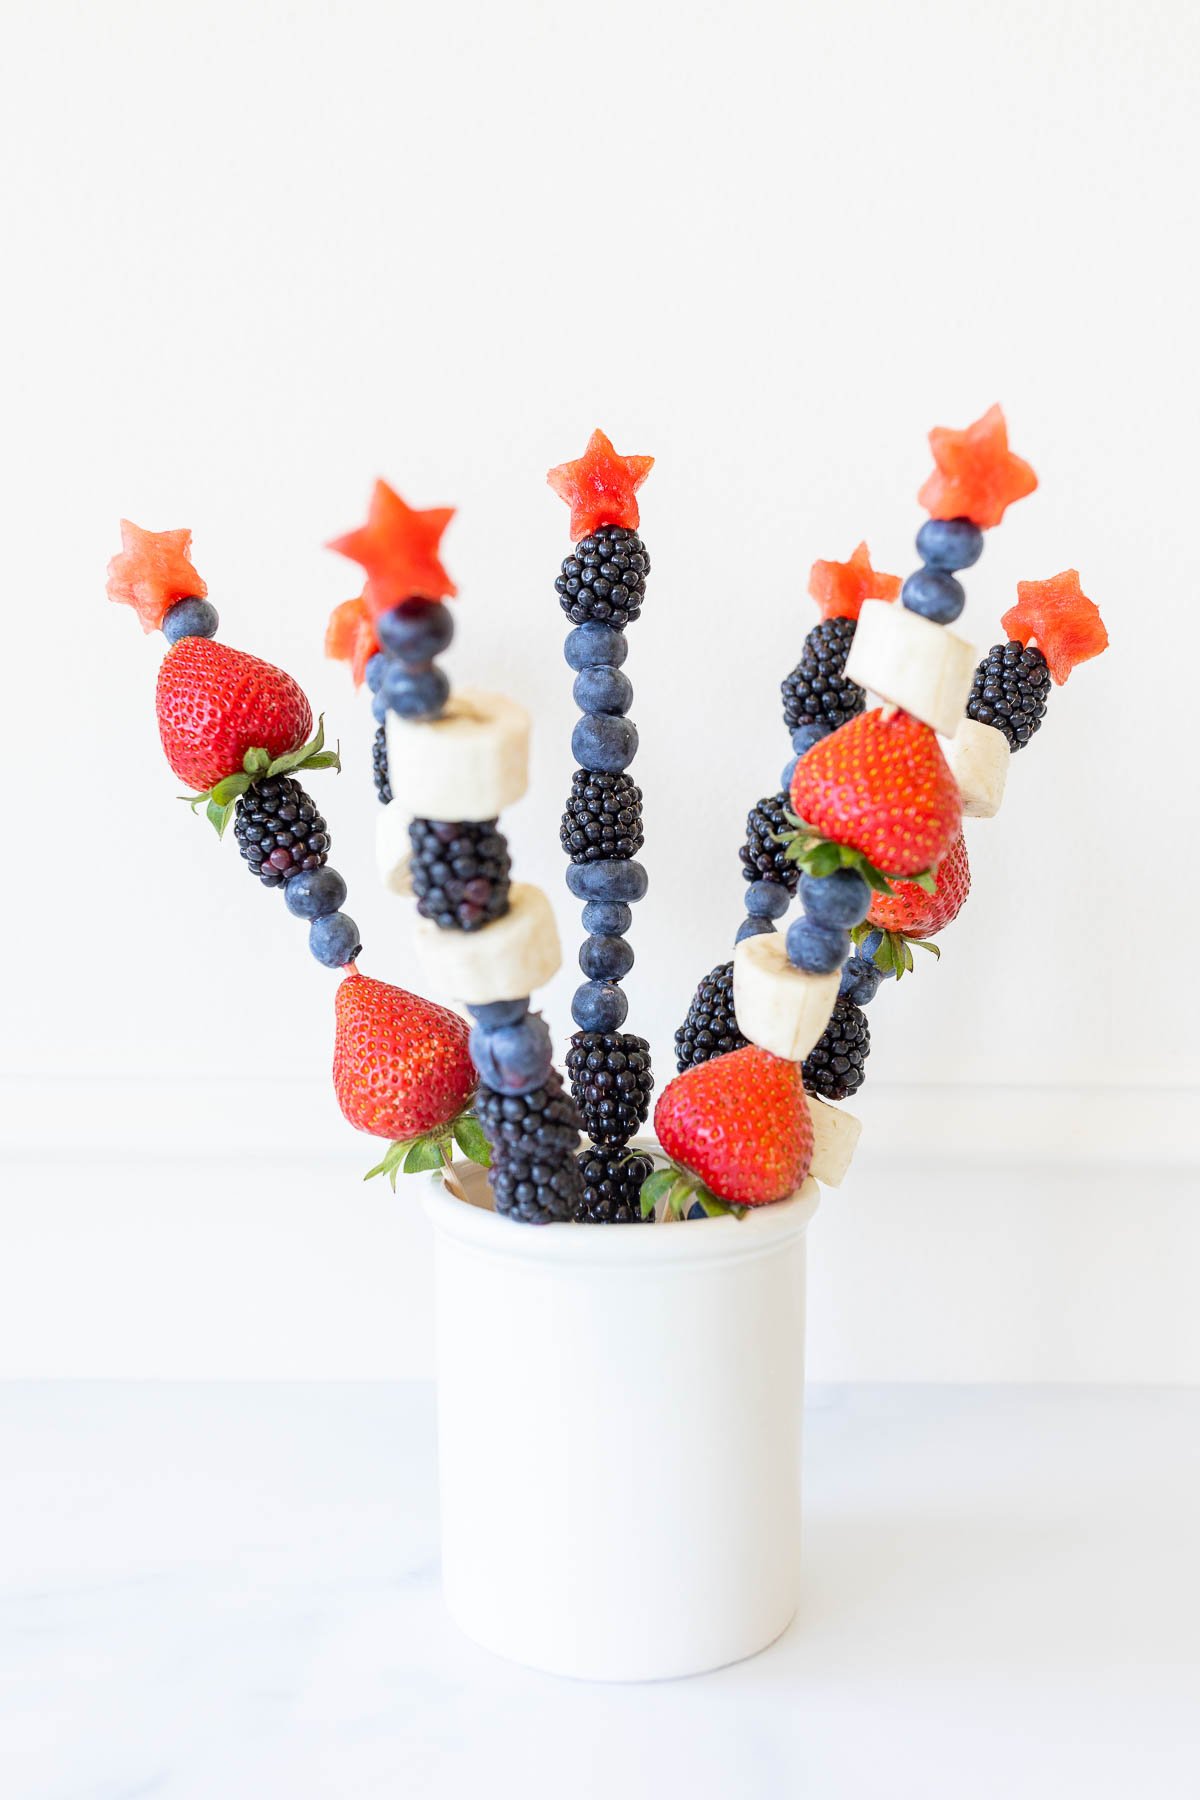 Red white and blue fruit skewers with a star on top in a white jar for display.